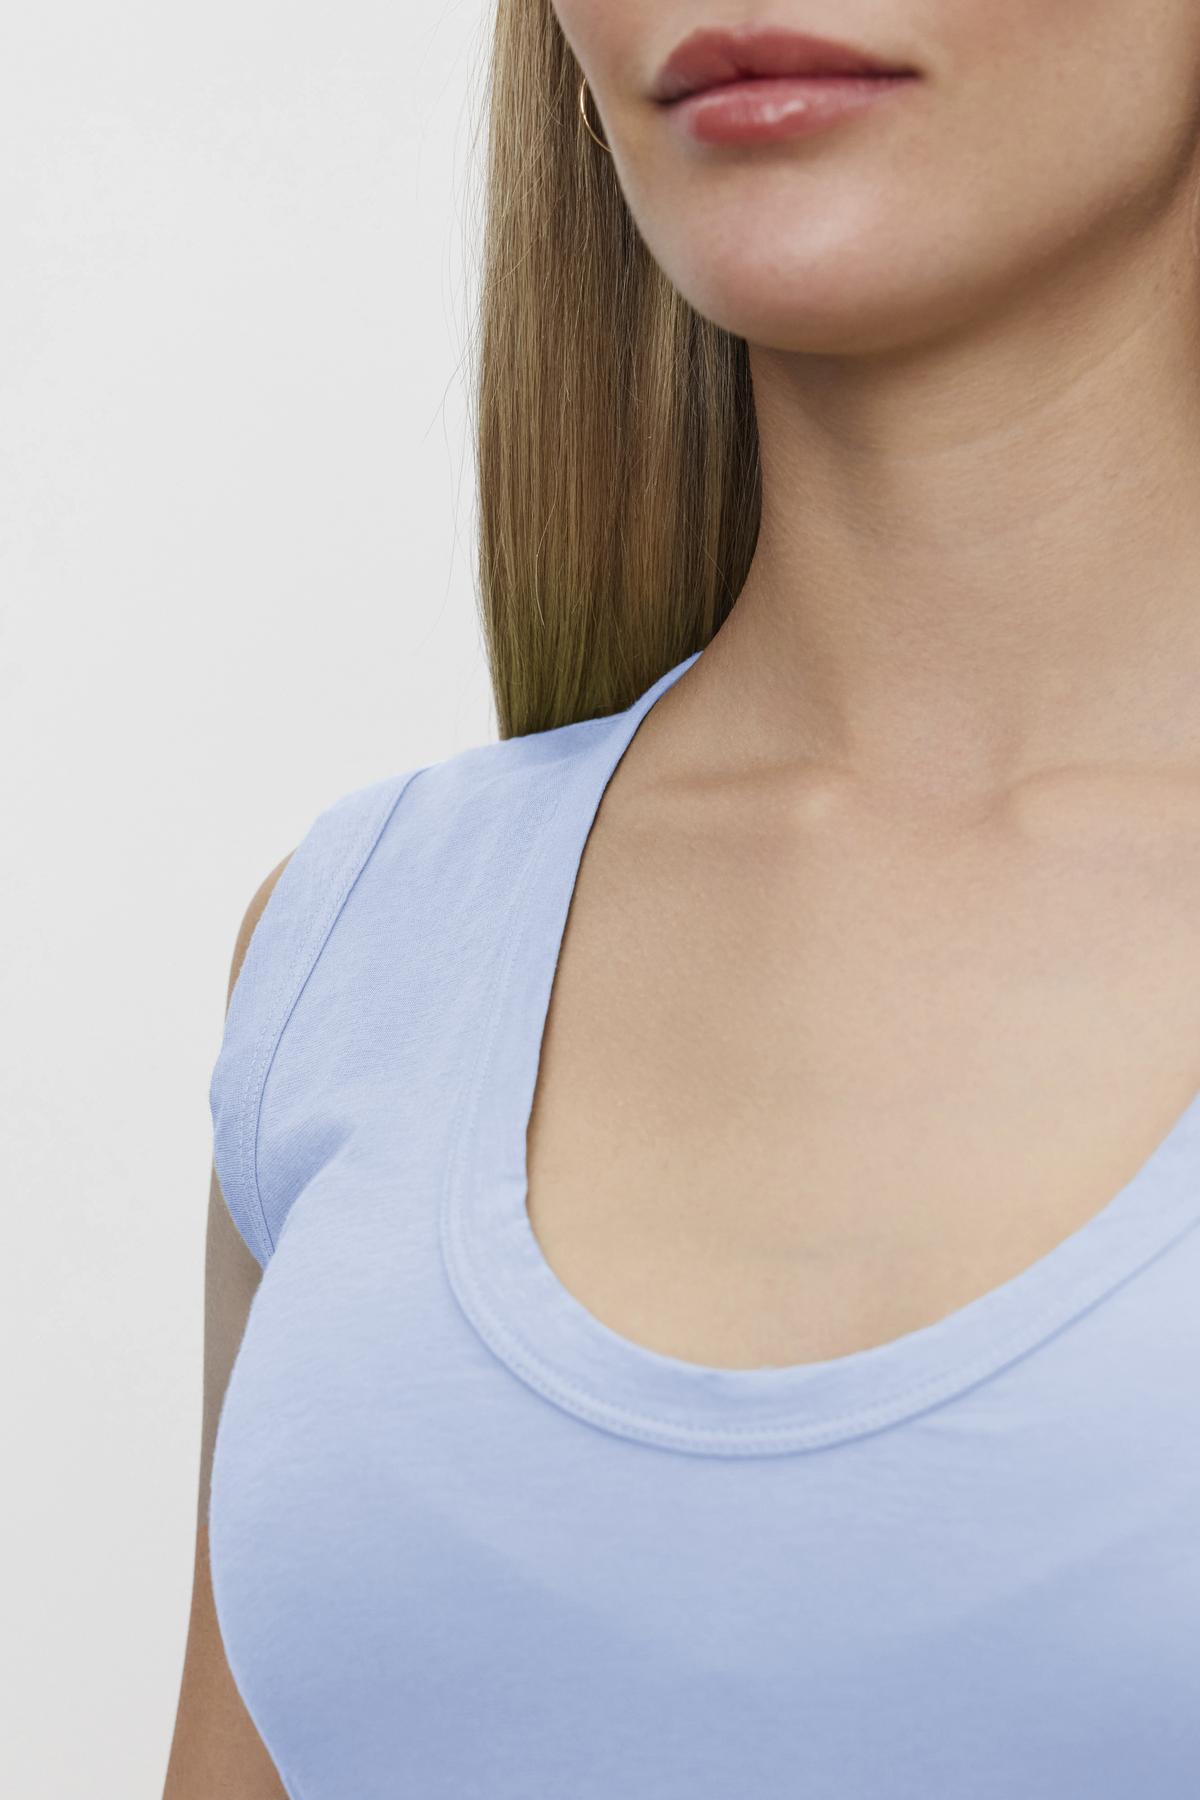   Close-up of a woman in a ESTINA GAUZY WHISPER FITTED TANK TOP by Velvet by Graham & Spencer, showing her neckline and long brown hair, against a white background. 